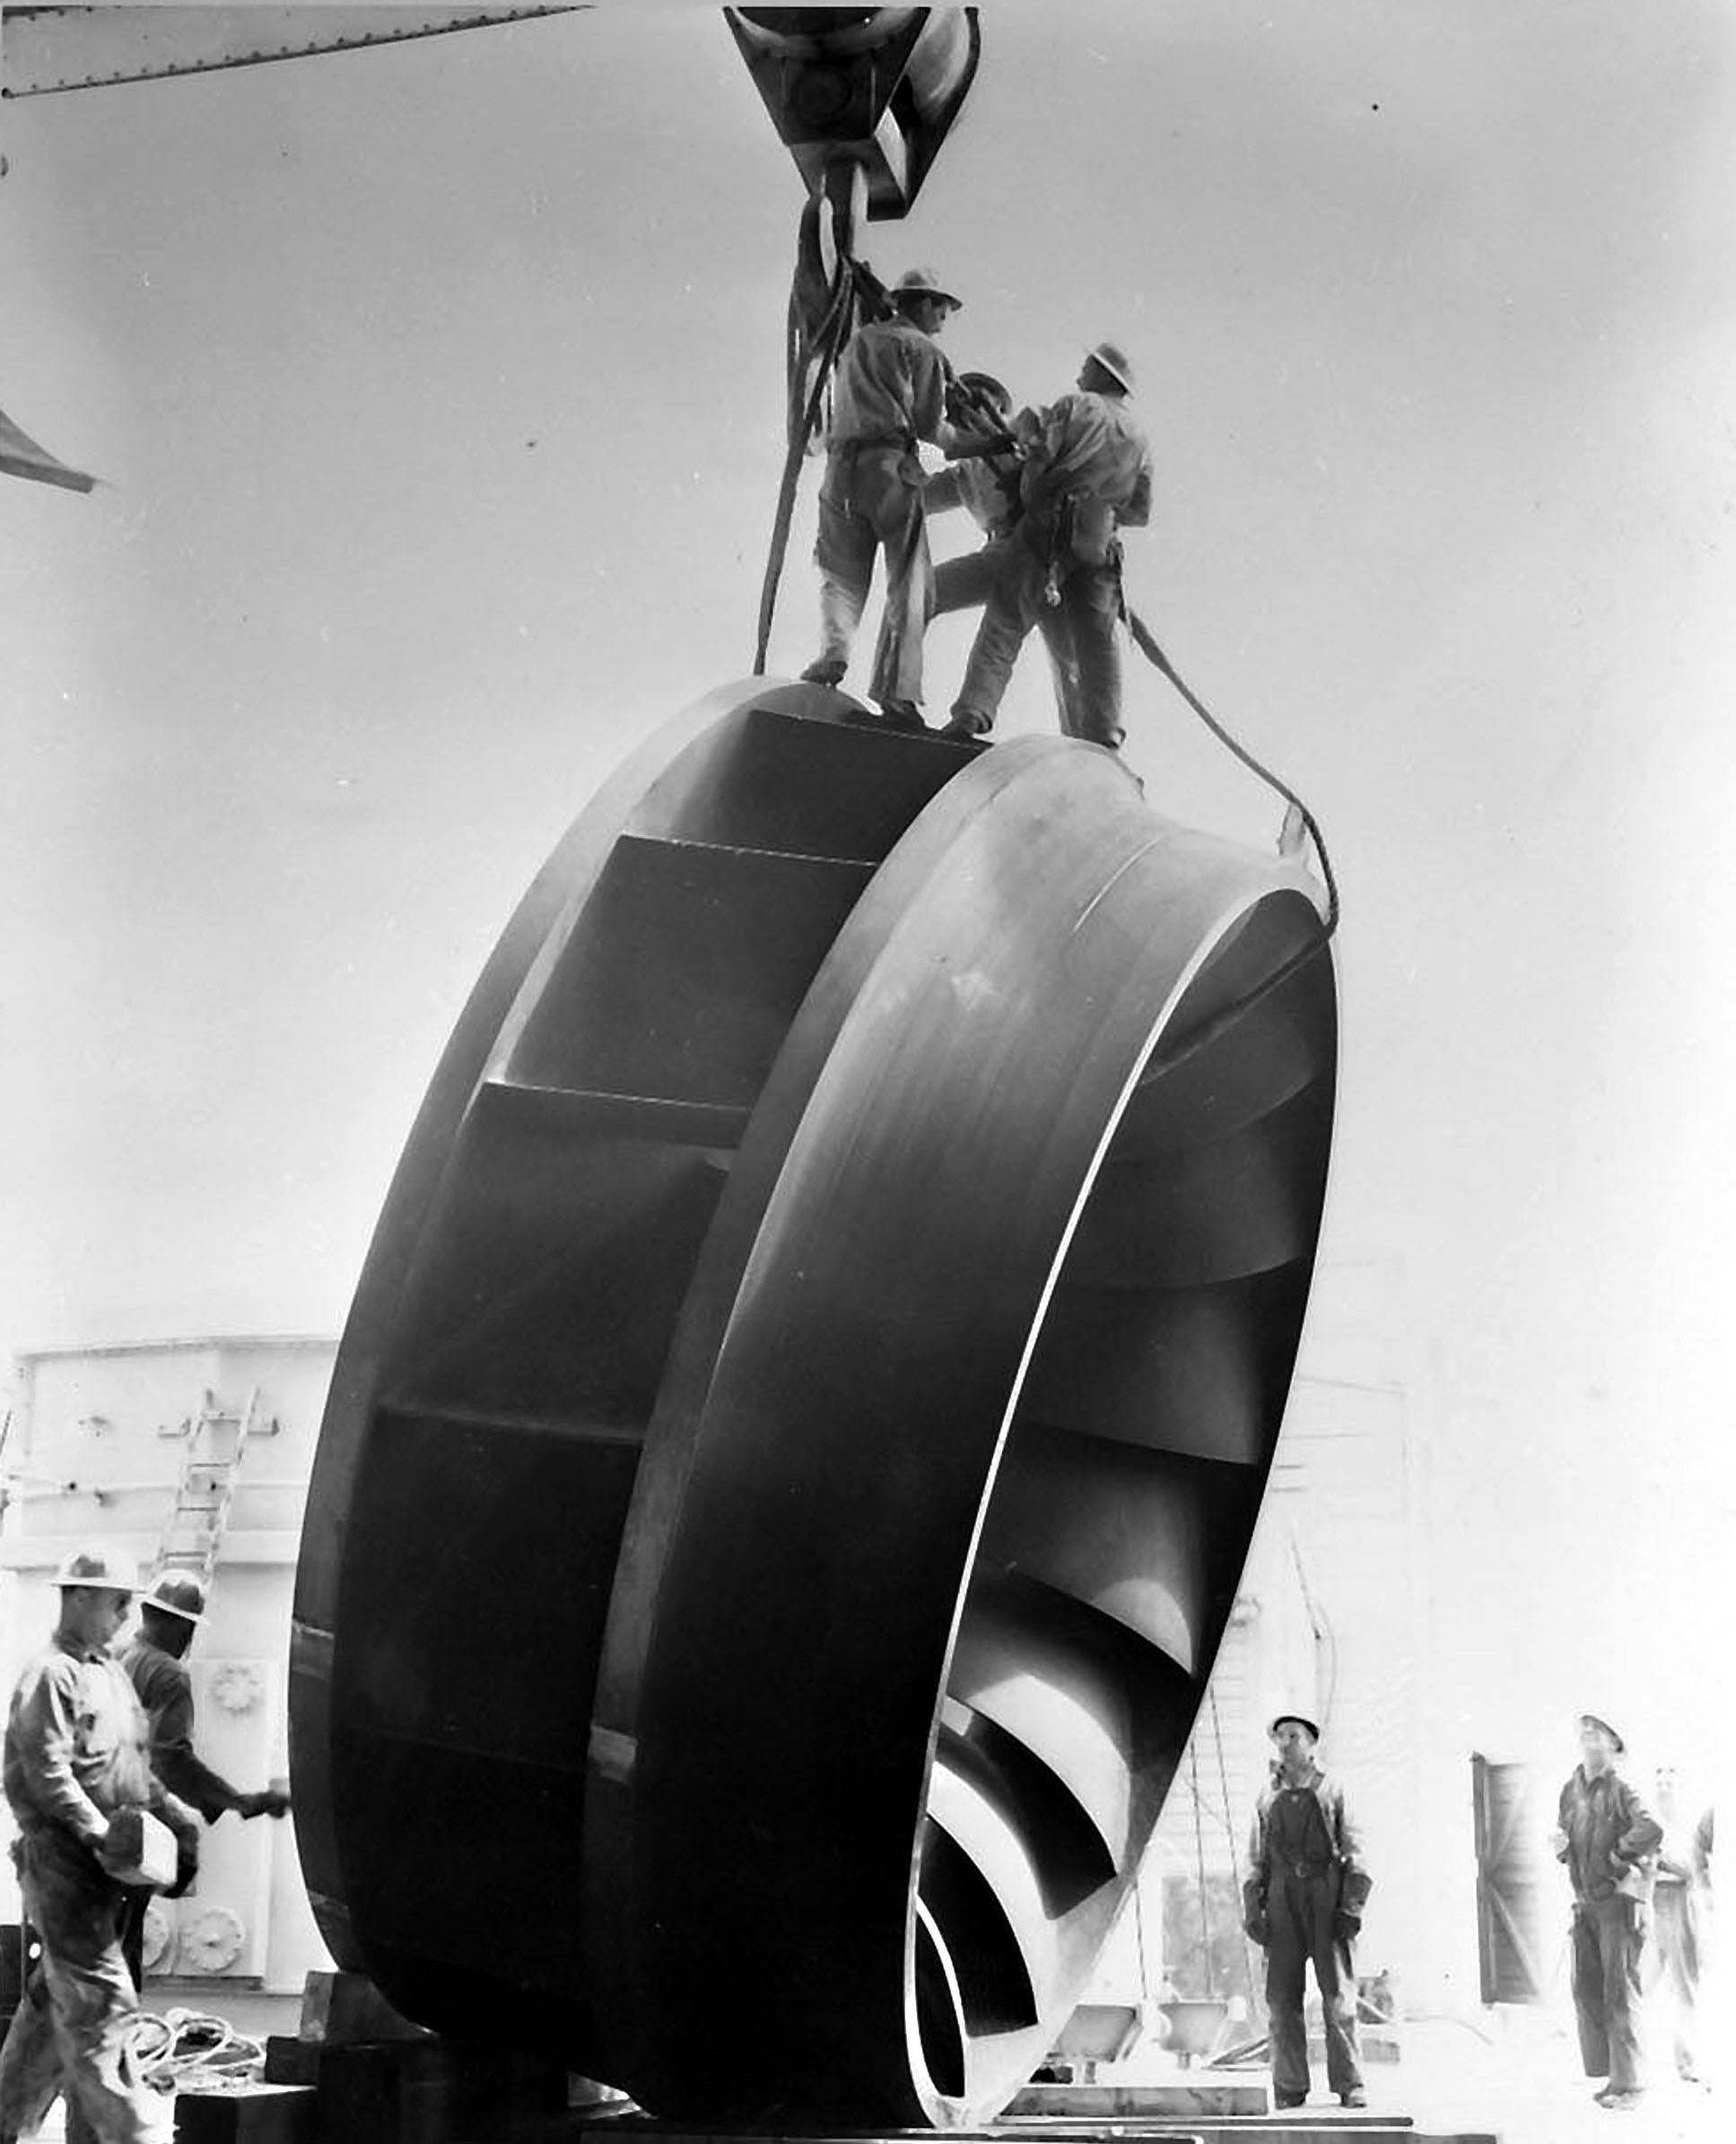 June 25, 1947. This waterwheel made by Newport news Shipbuilding and Drydock co. of Newport, Virginia just arriving at Grand Coulee Dam.